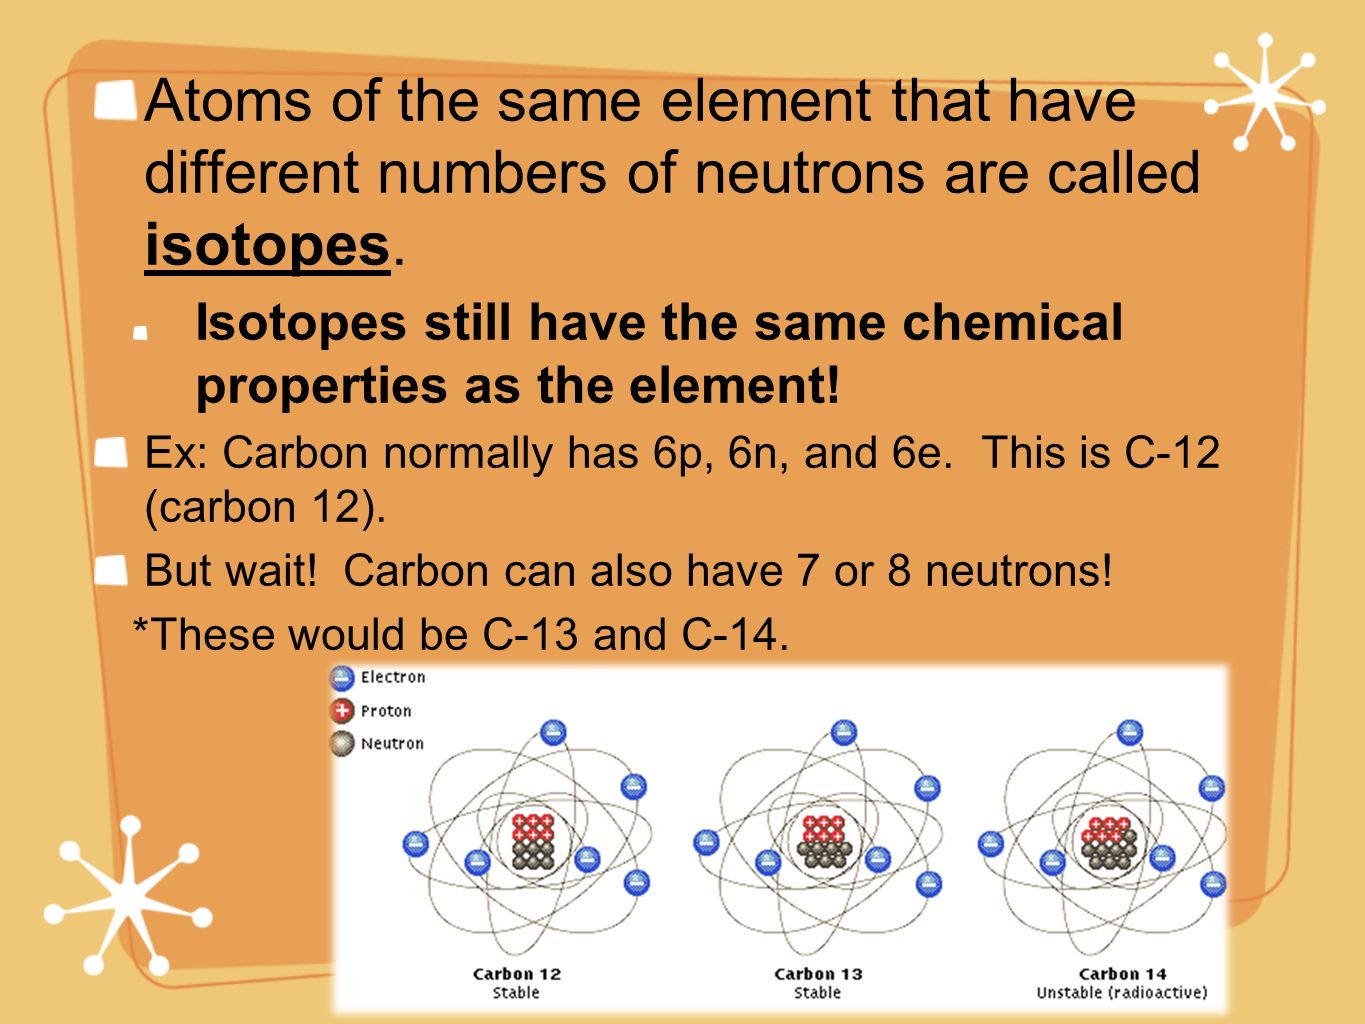 Atoms of the same element that have different numbers of neutrons are called isotopes.